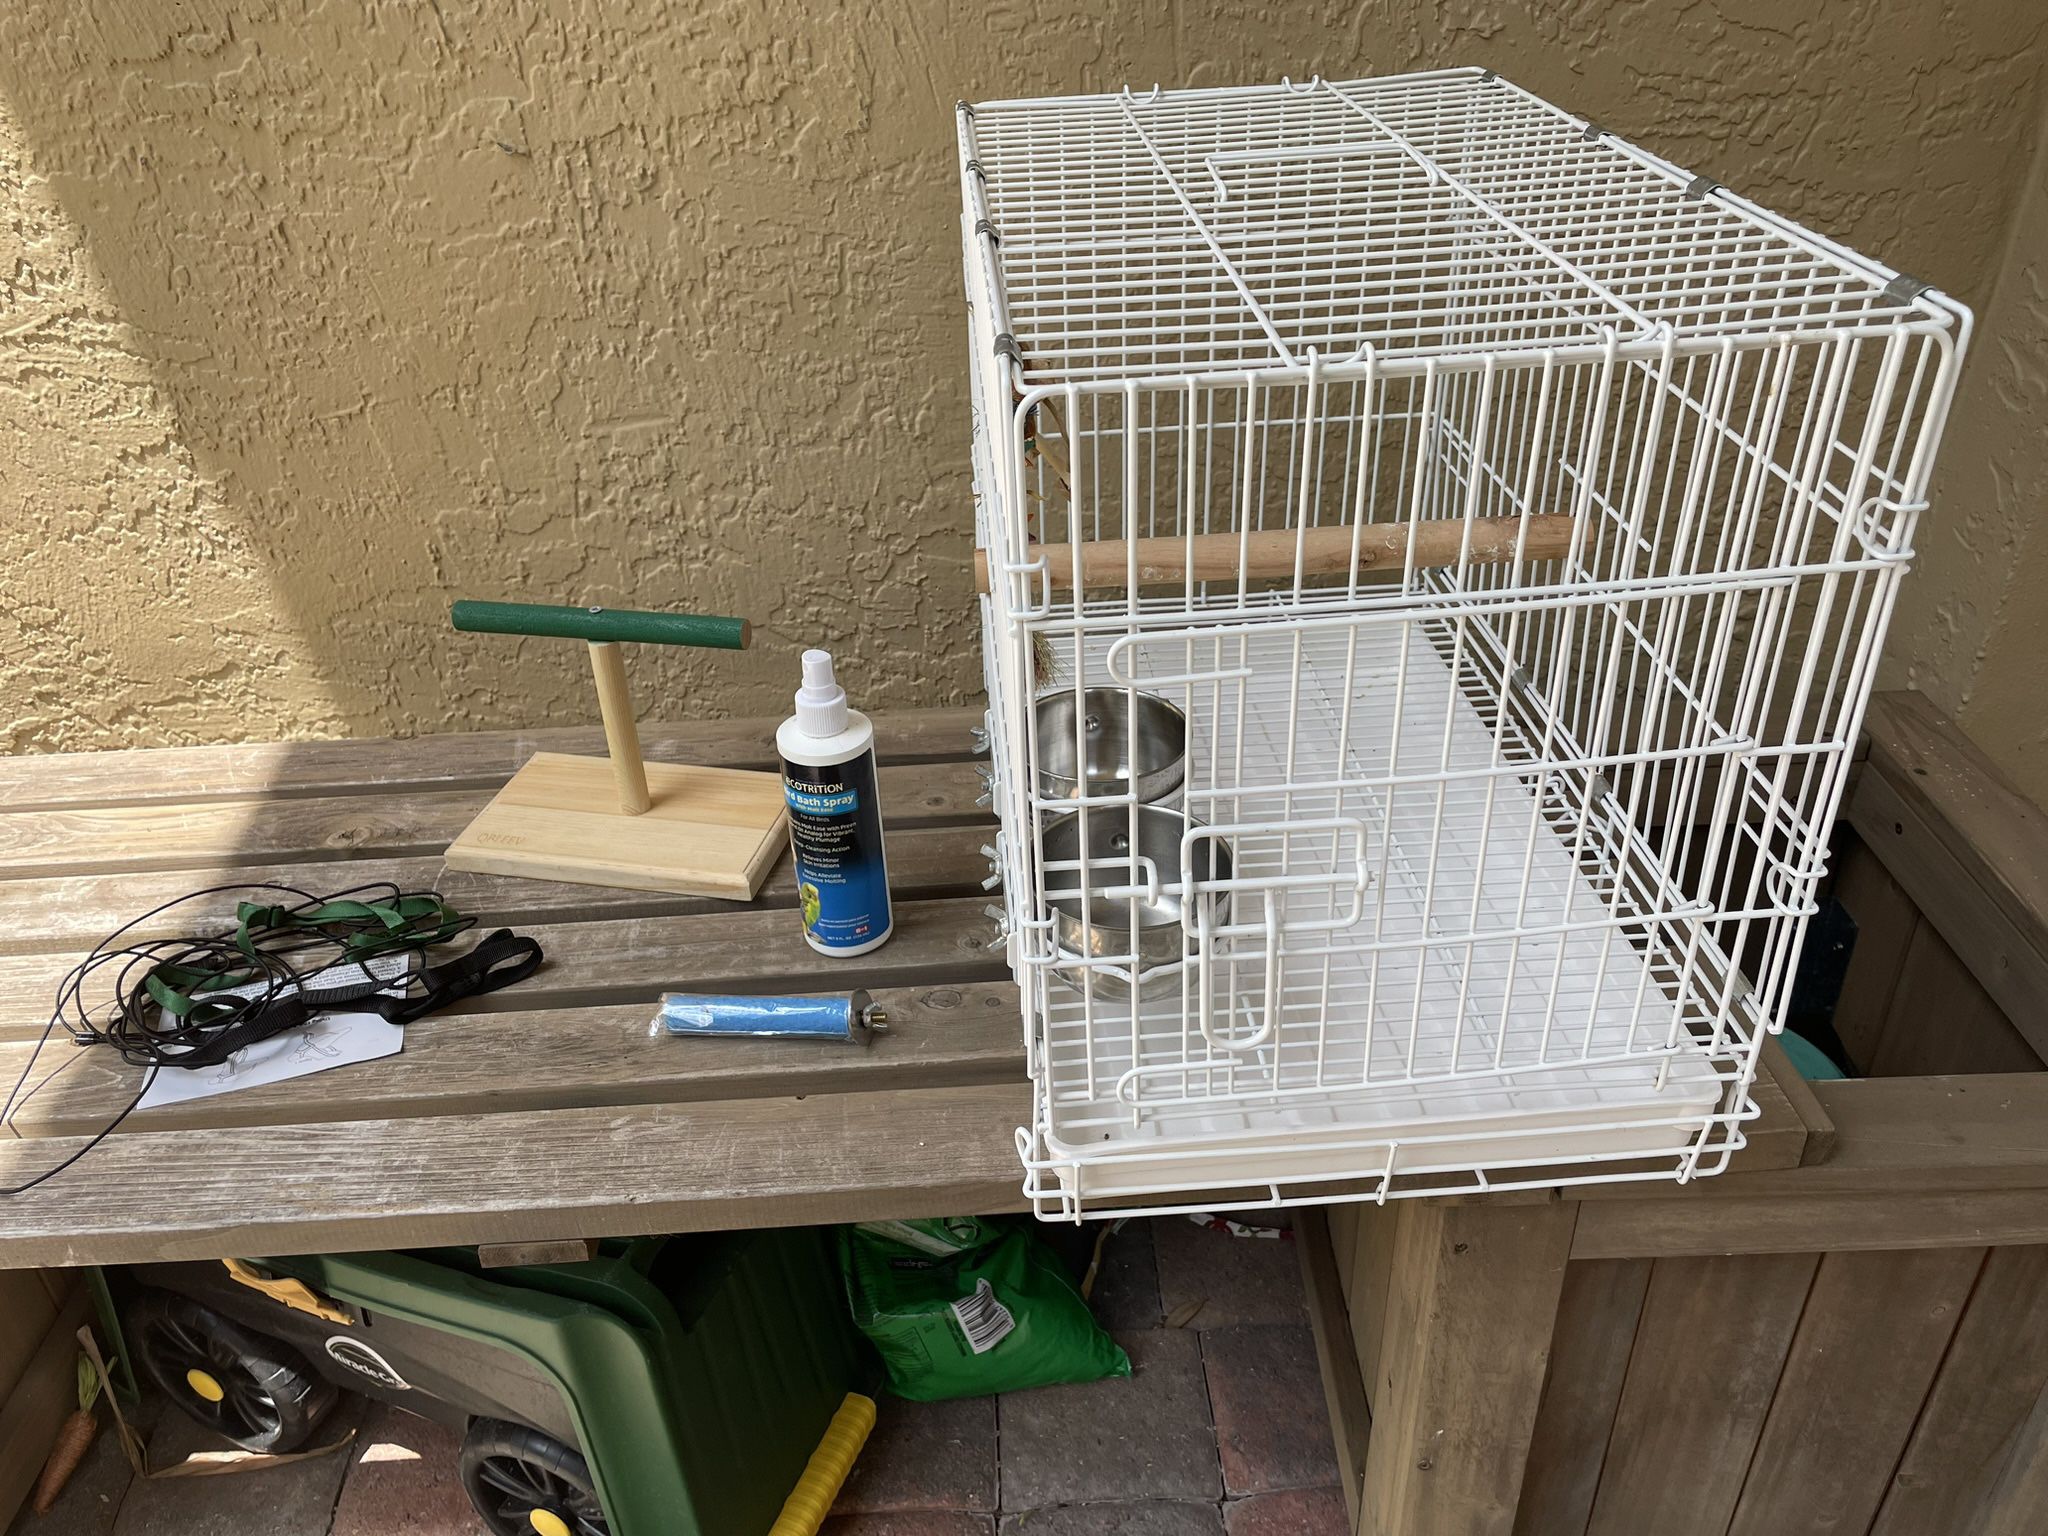 Travel Bird Cage And Accessories